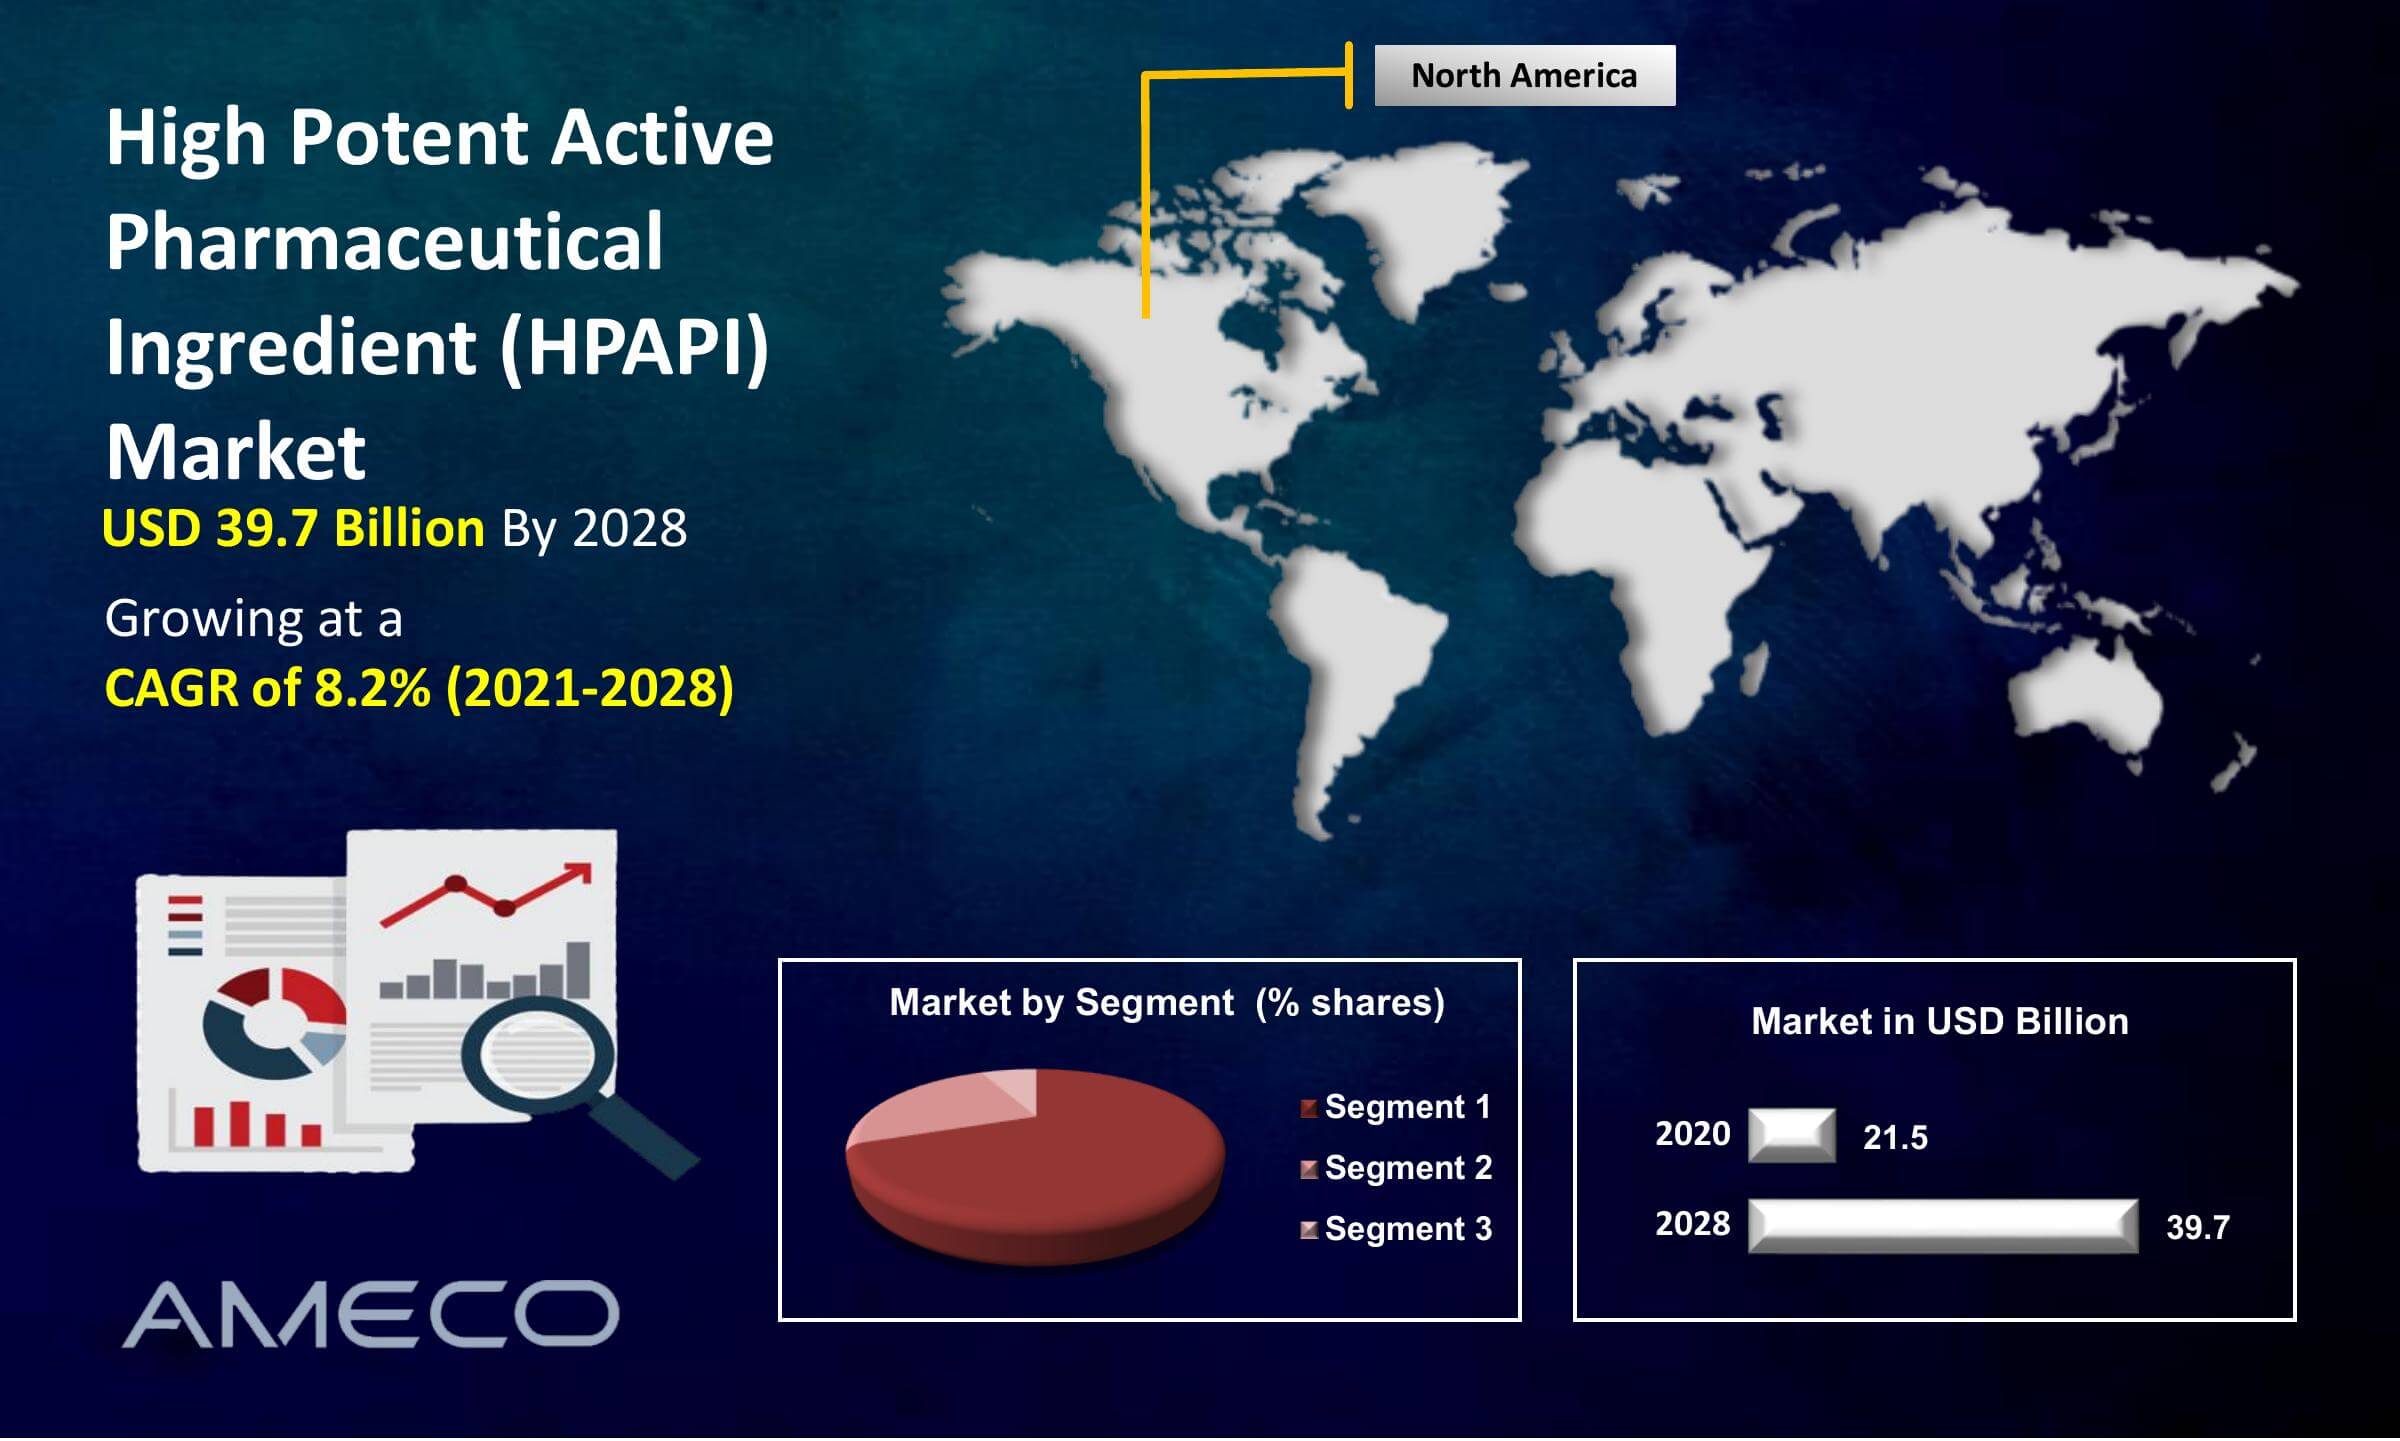 High Potent Active Pharmaceutical Ingredient (HPAPI) Market Size